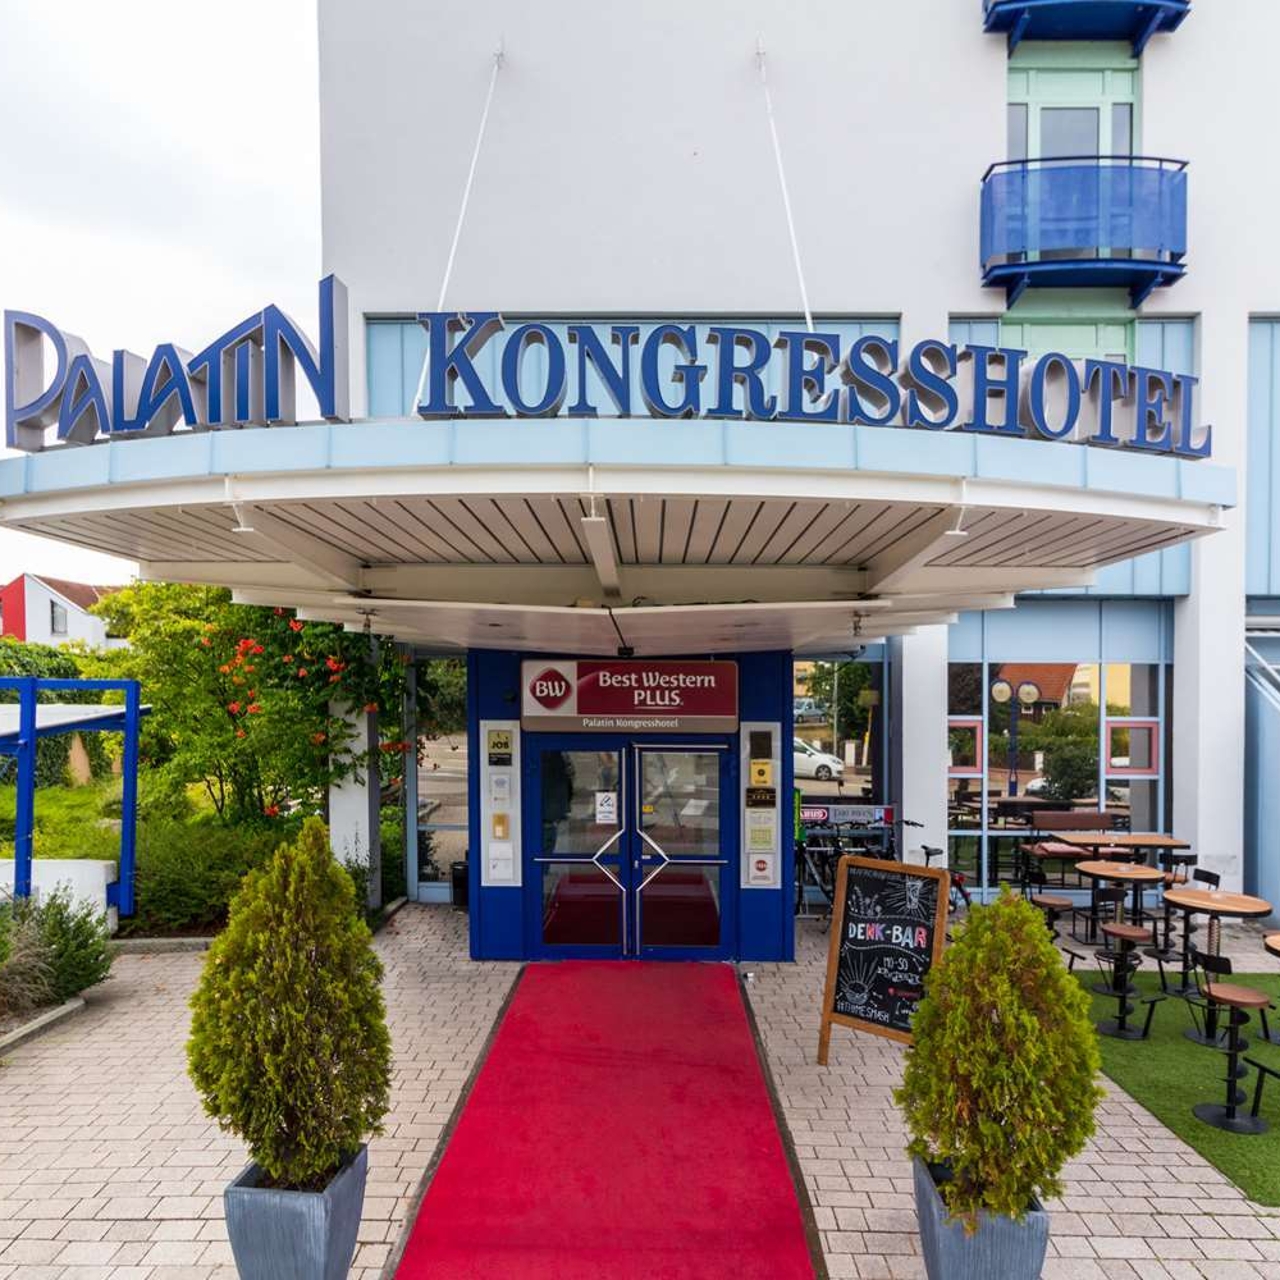 Best Western Plus Palatin Kongresshotel Baden-Wurttemberg at HRS with free  services